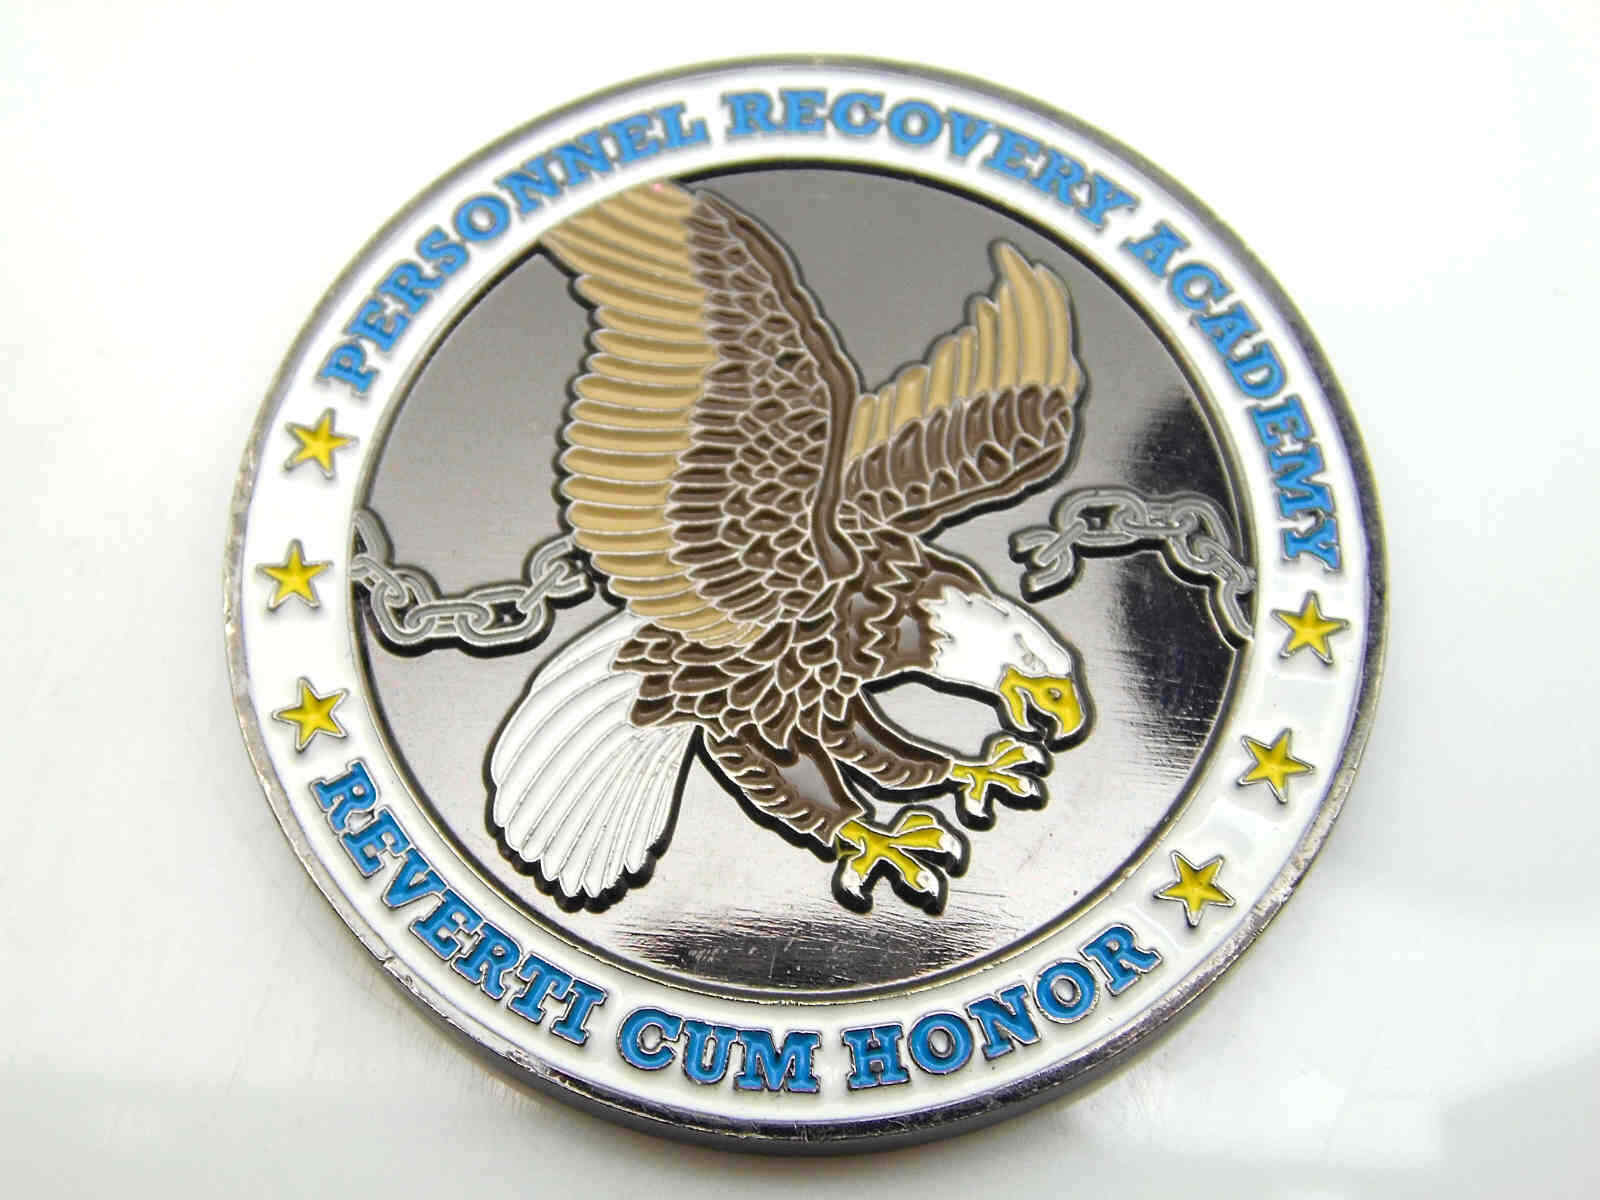 PERSONNEL RECOVERY ACADEMY REVERTI CUM HONOR CHALLENGE COIN